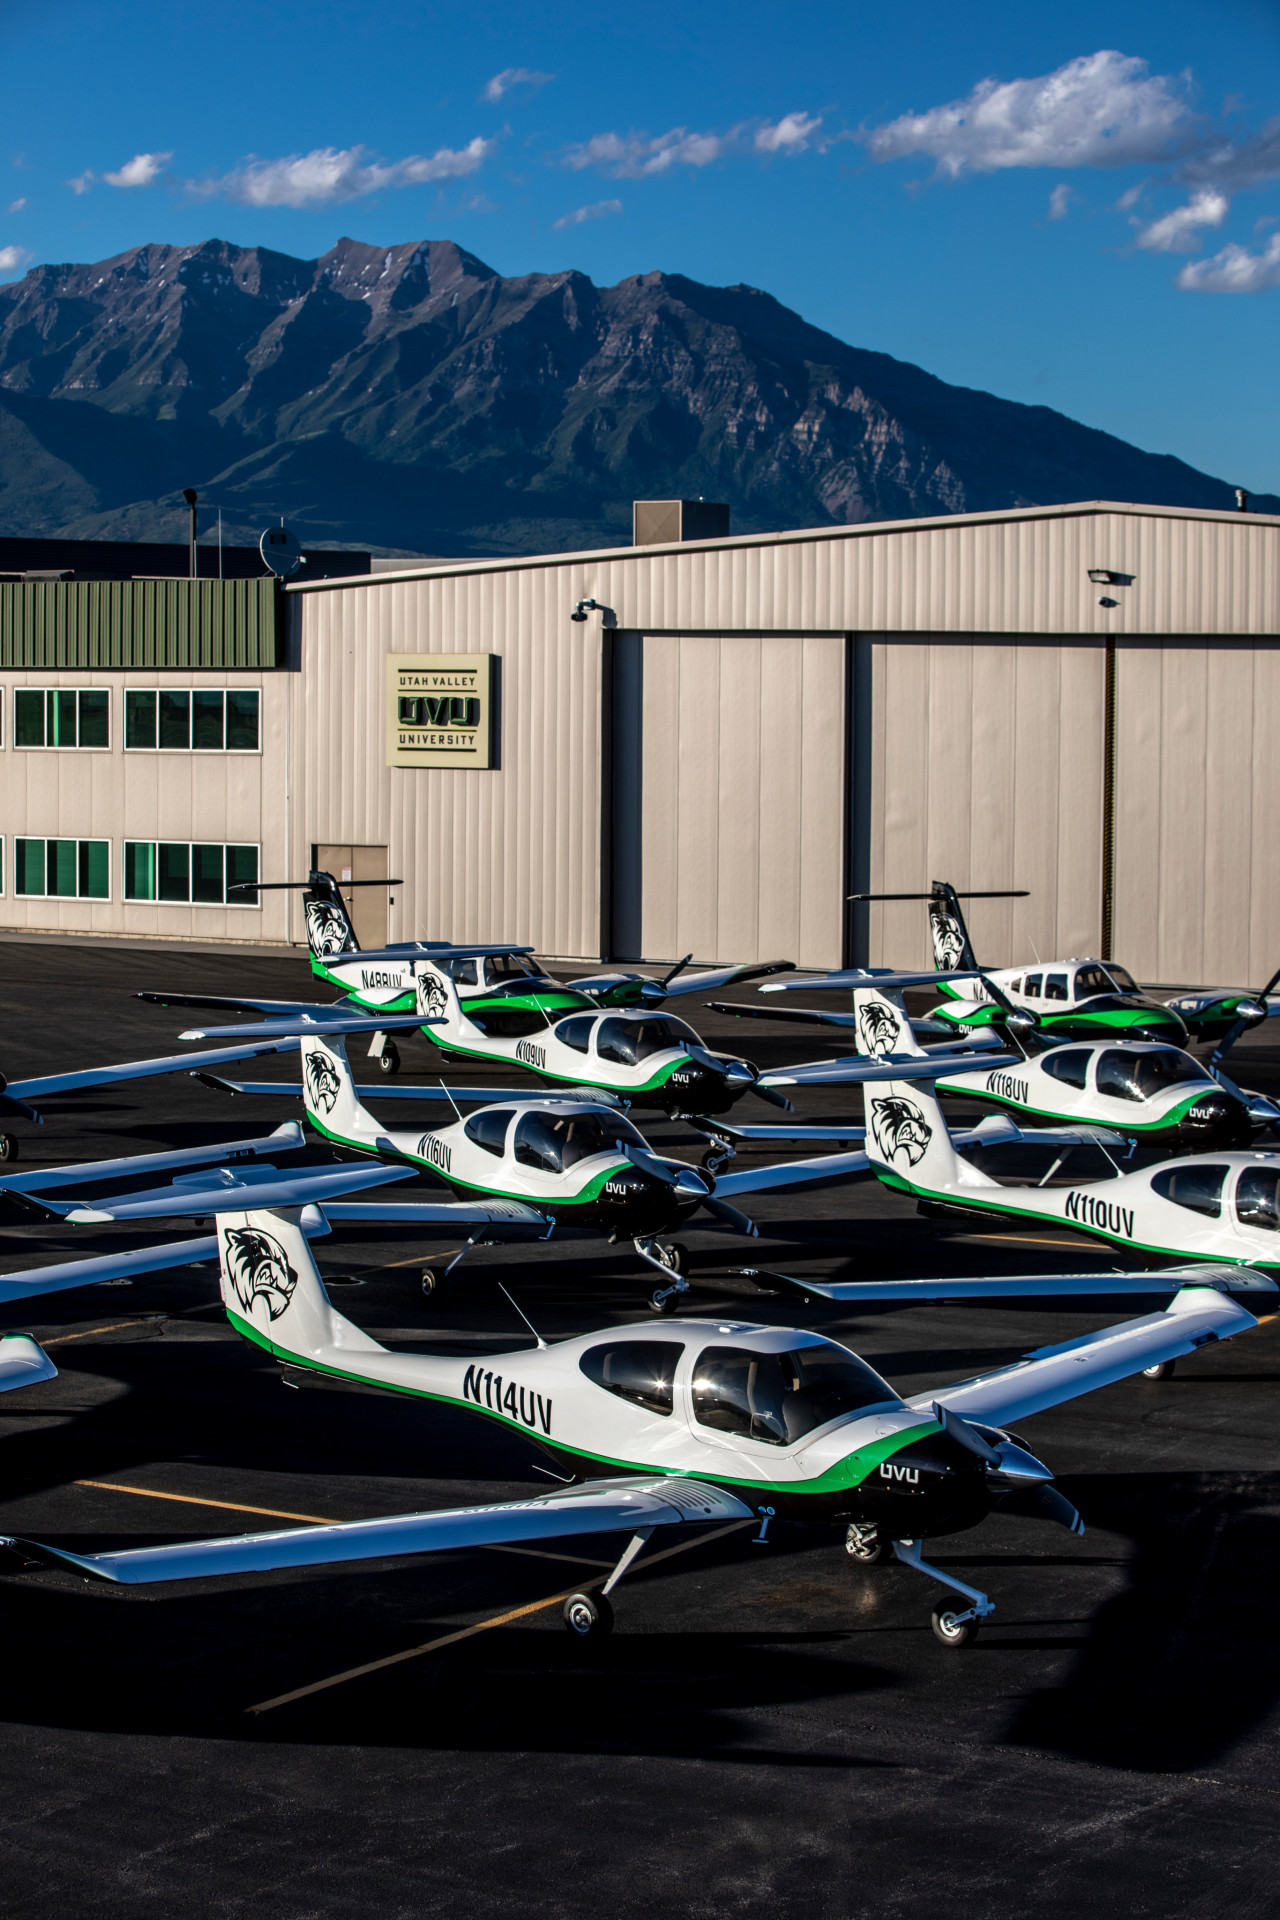 fleet with hangar and timp in background